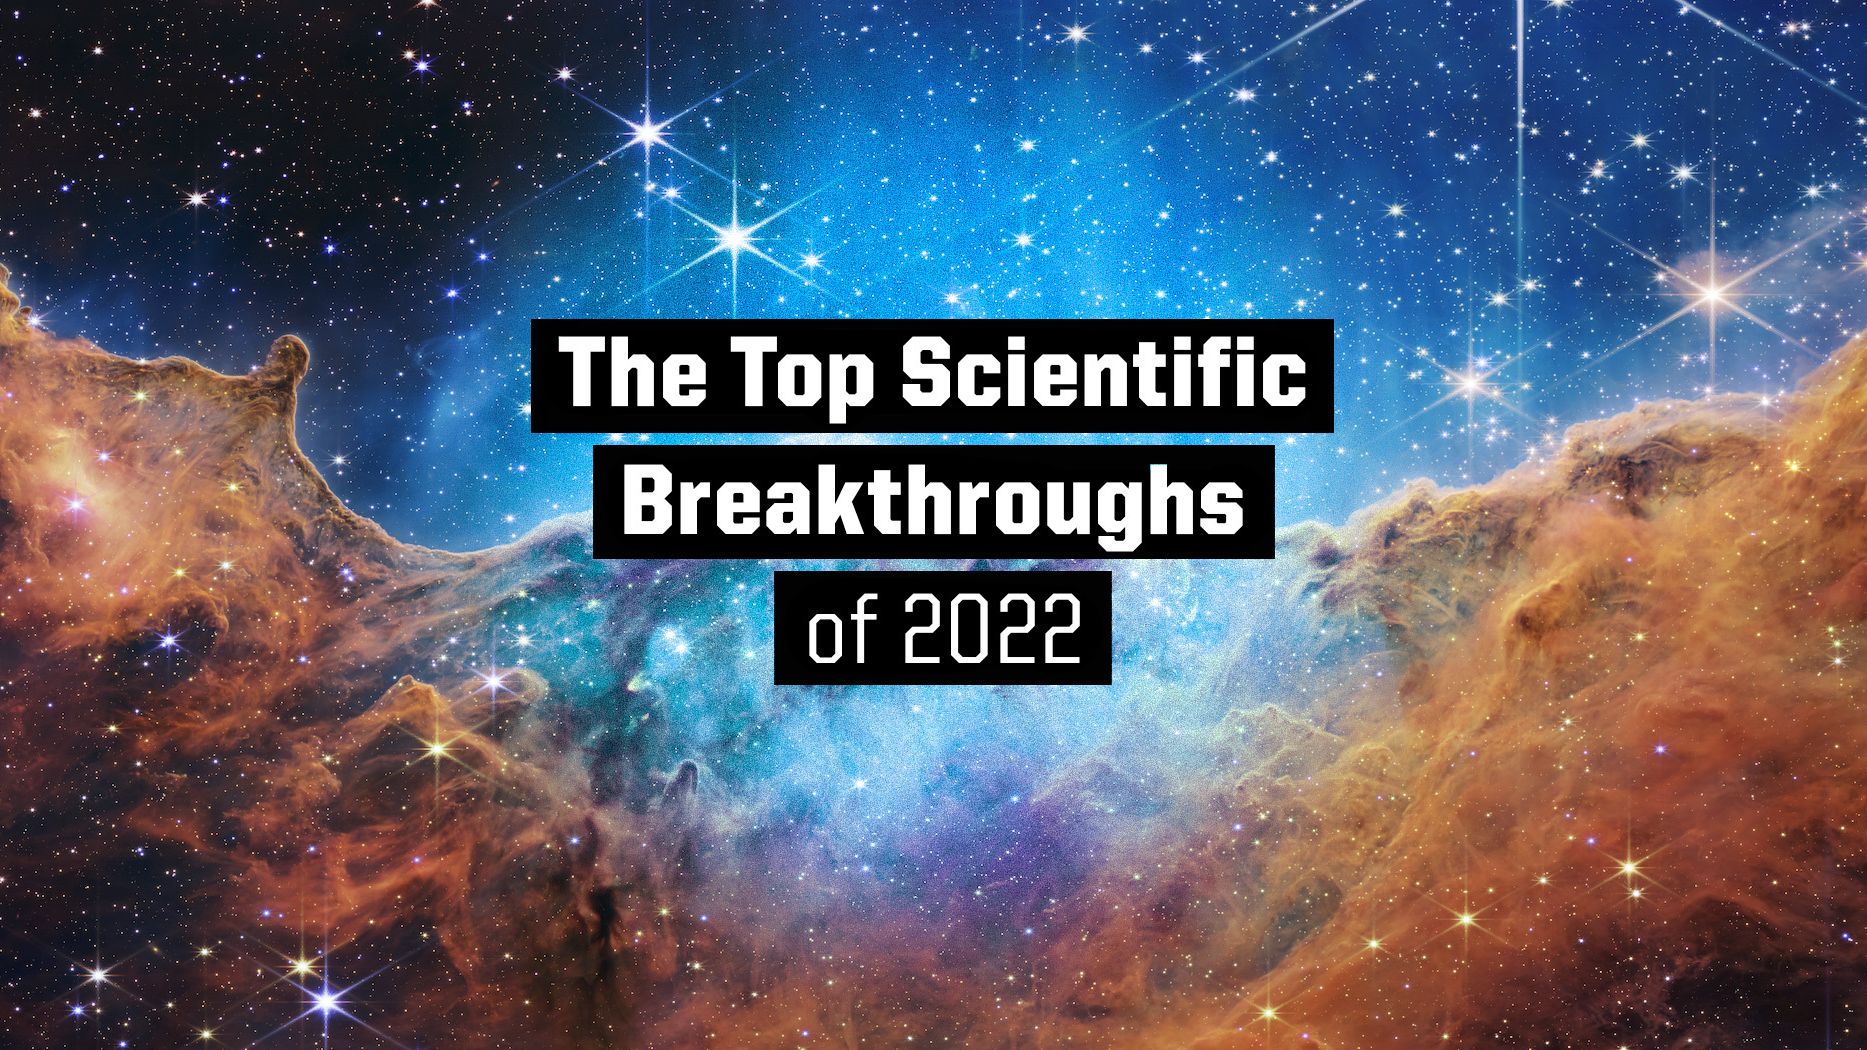 top science and tech breakthroughs of 2022 text on webb telescope carina nebula background